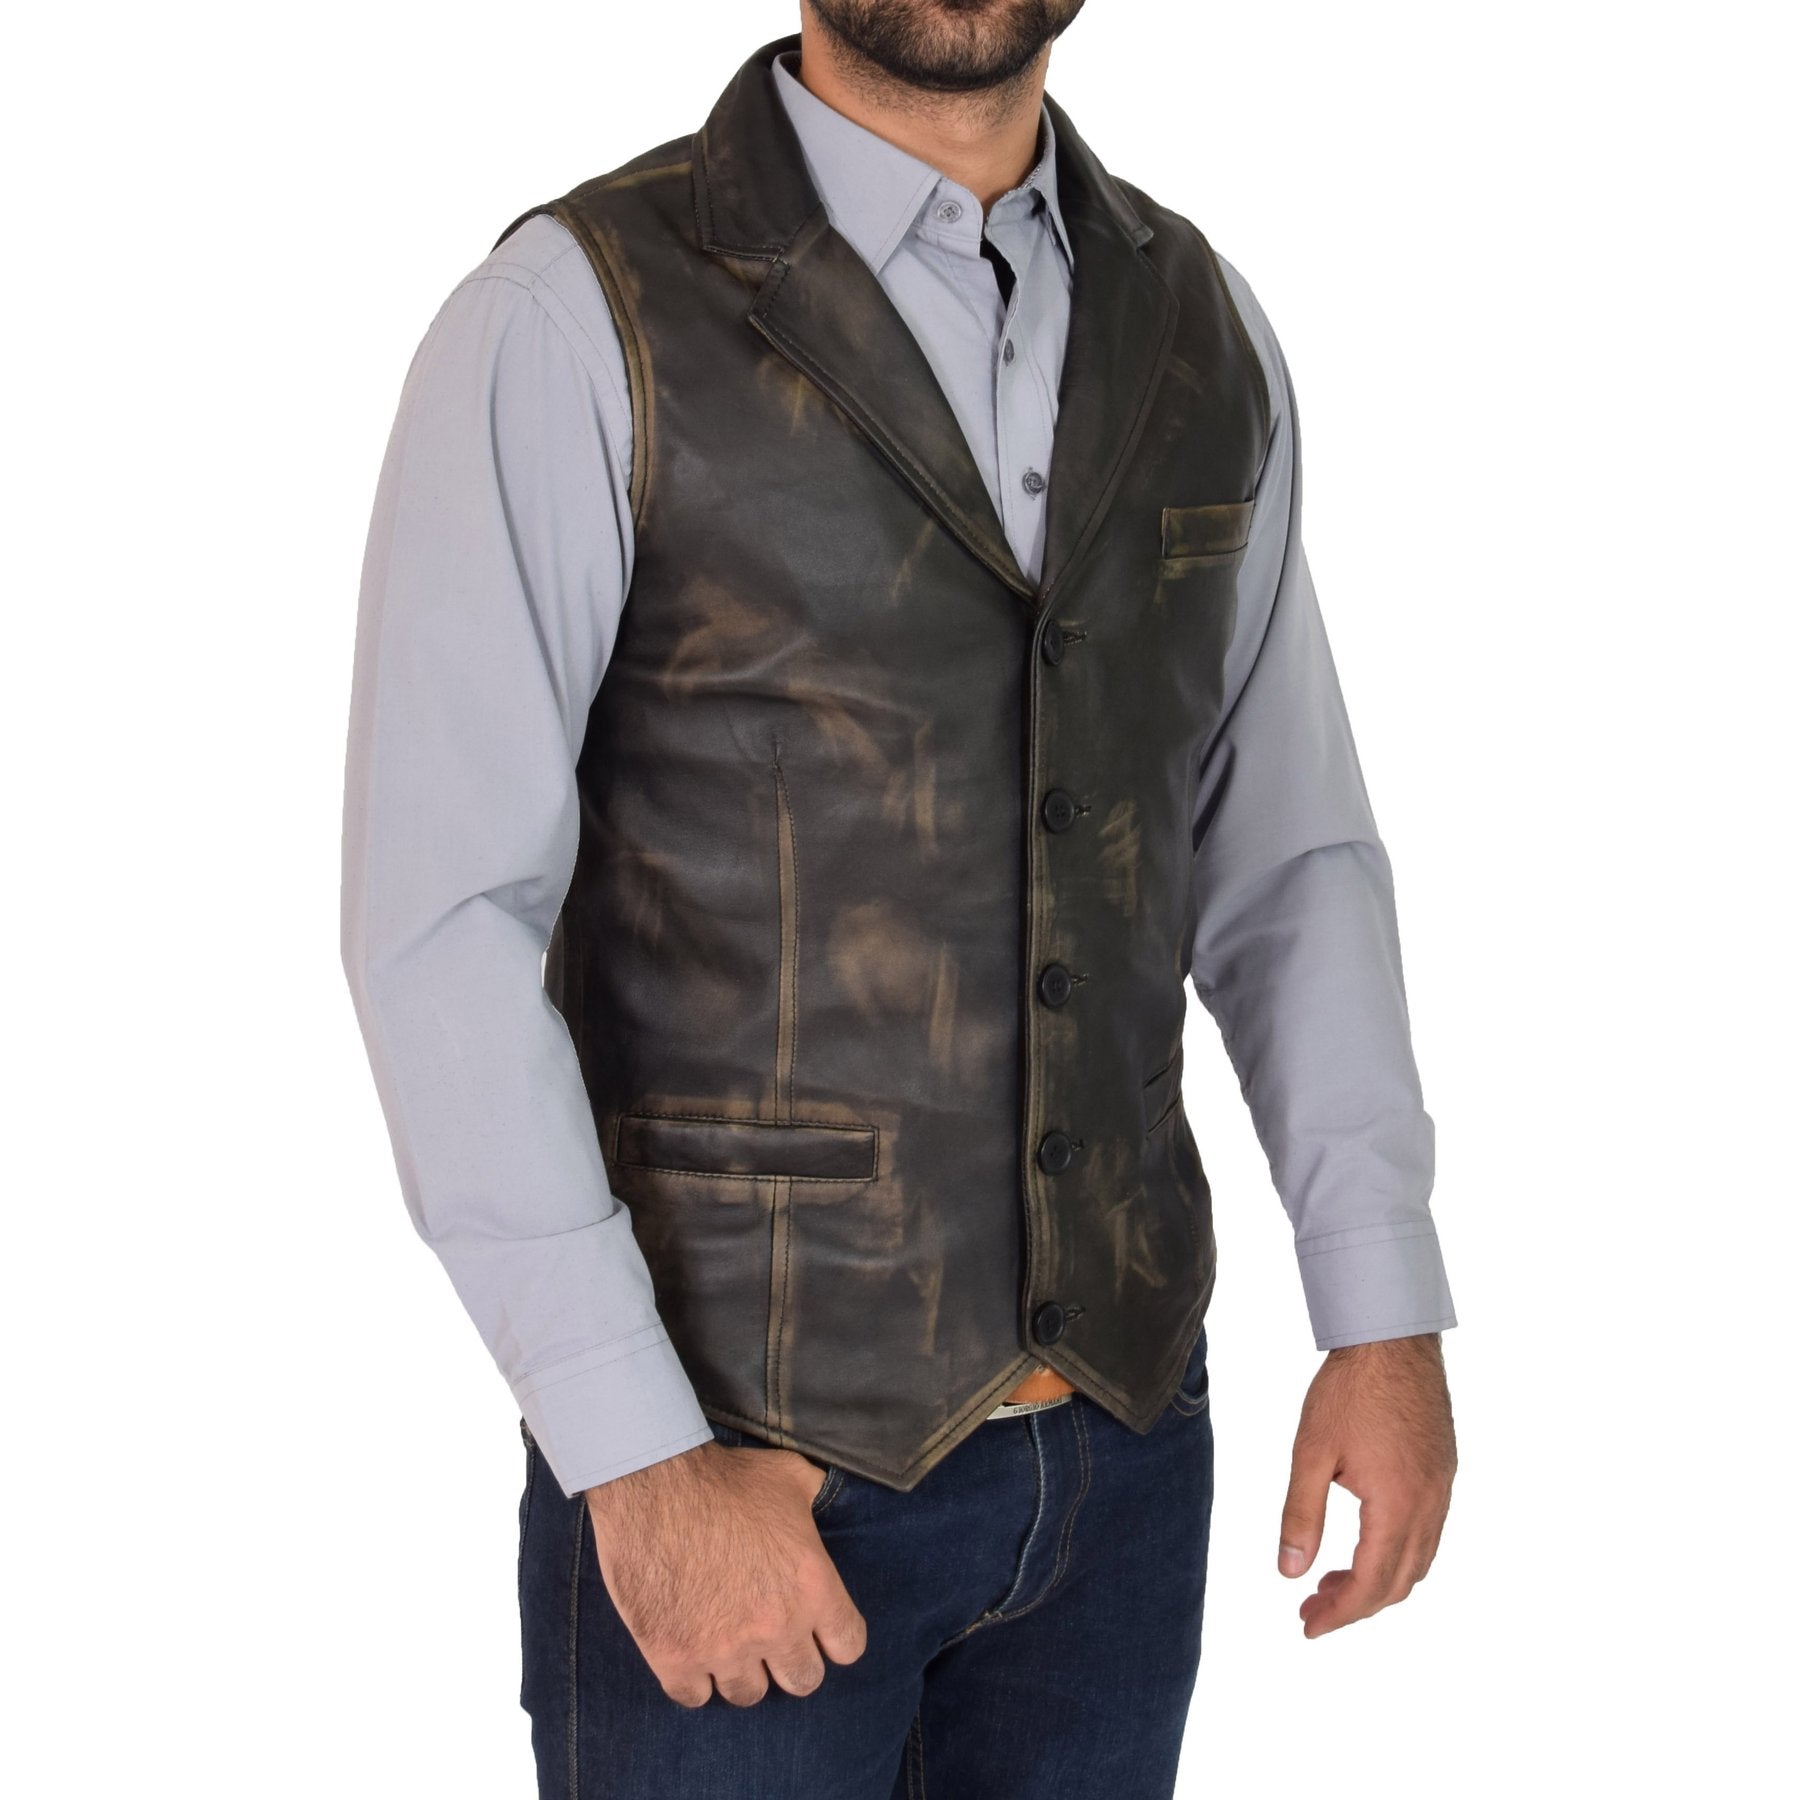 Spine Spark Men's Motorbike Soft Leather Rub Off Classic Style Vest